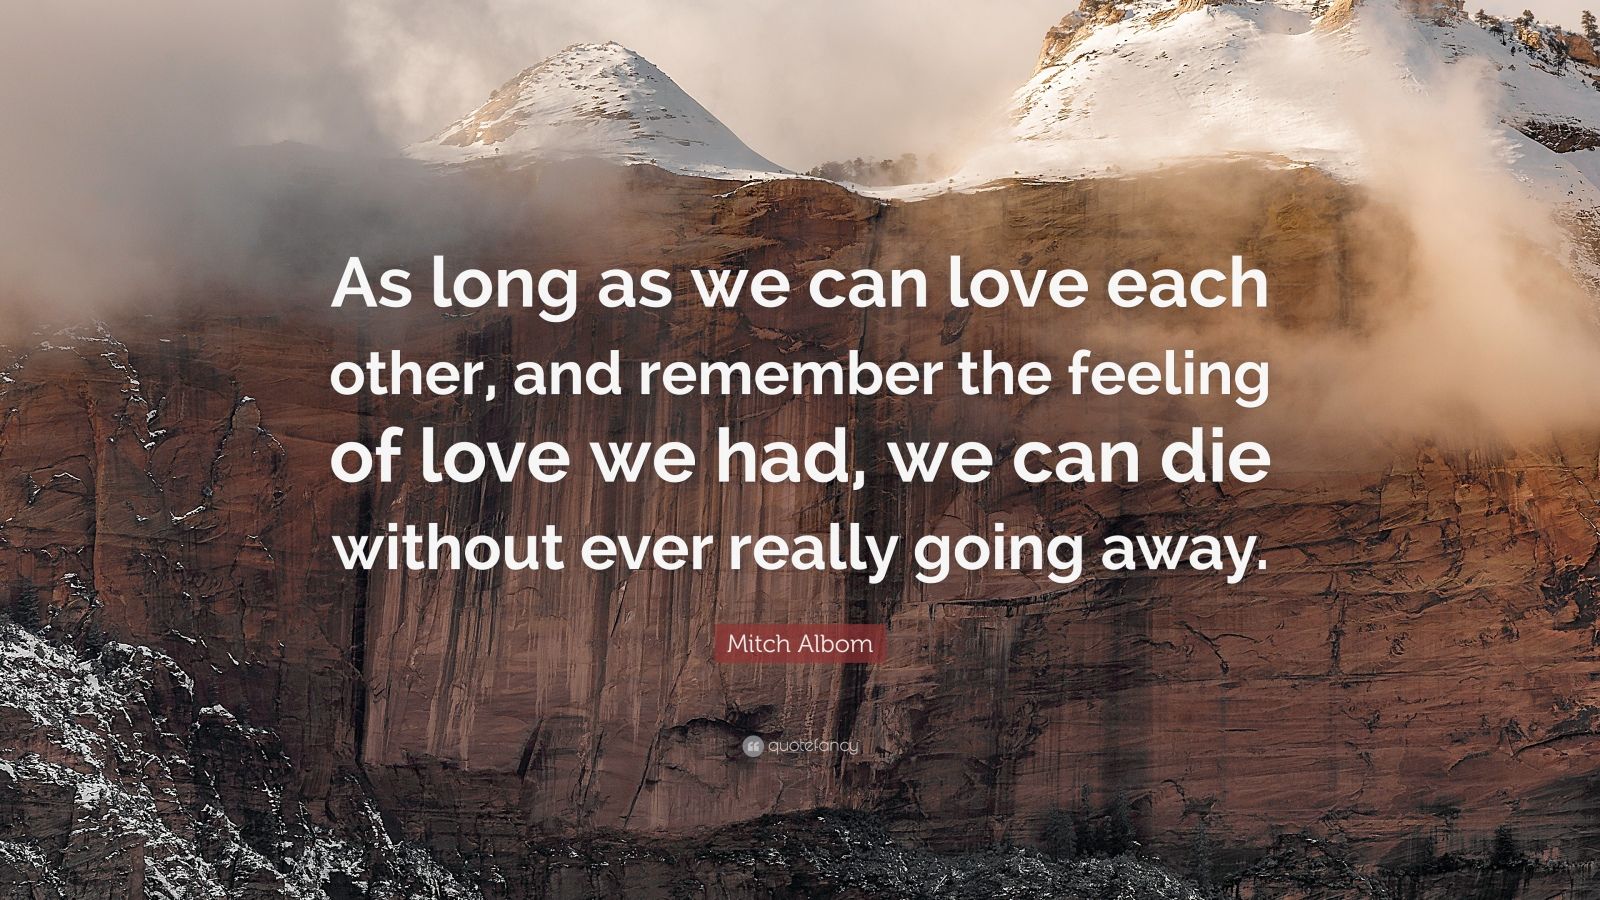 Mitch Albom Quote: "As long as we can love each other, and ...